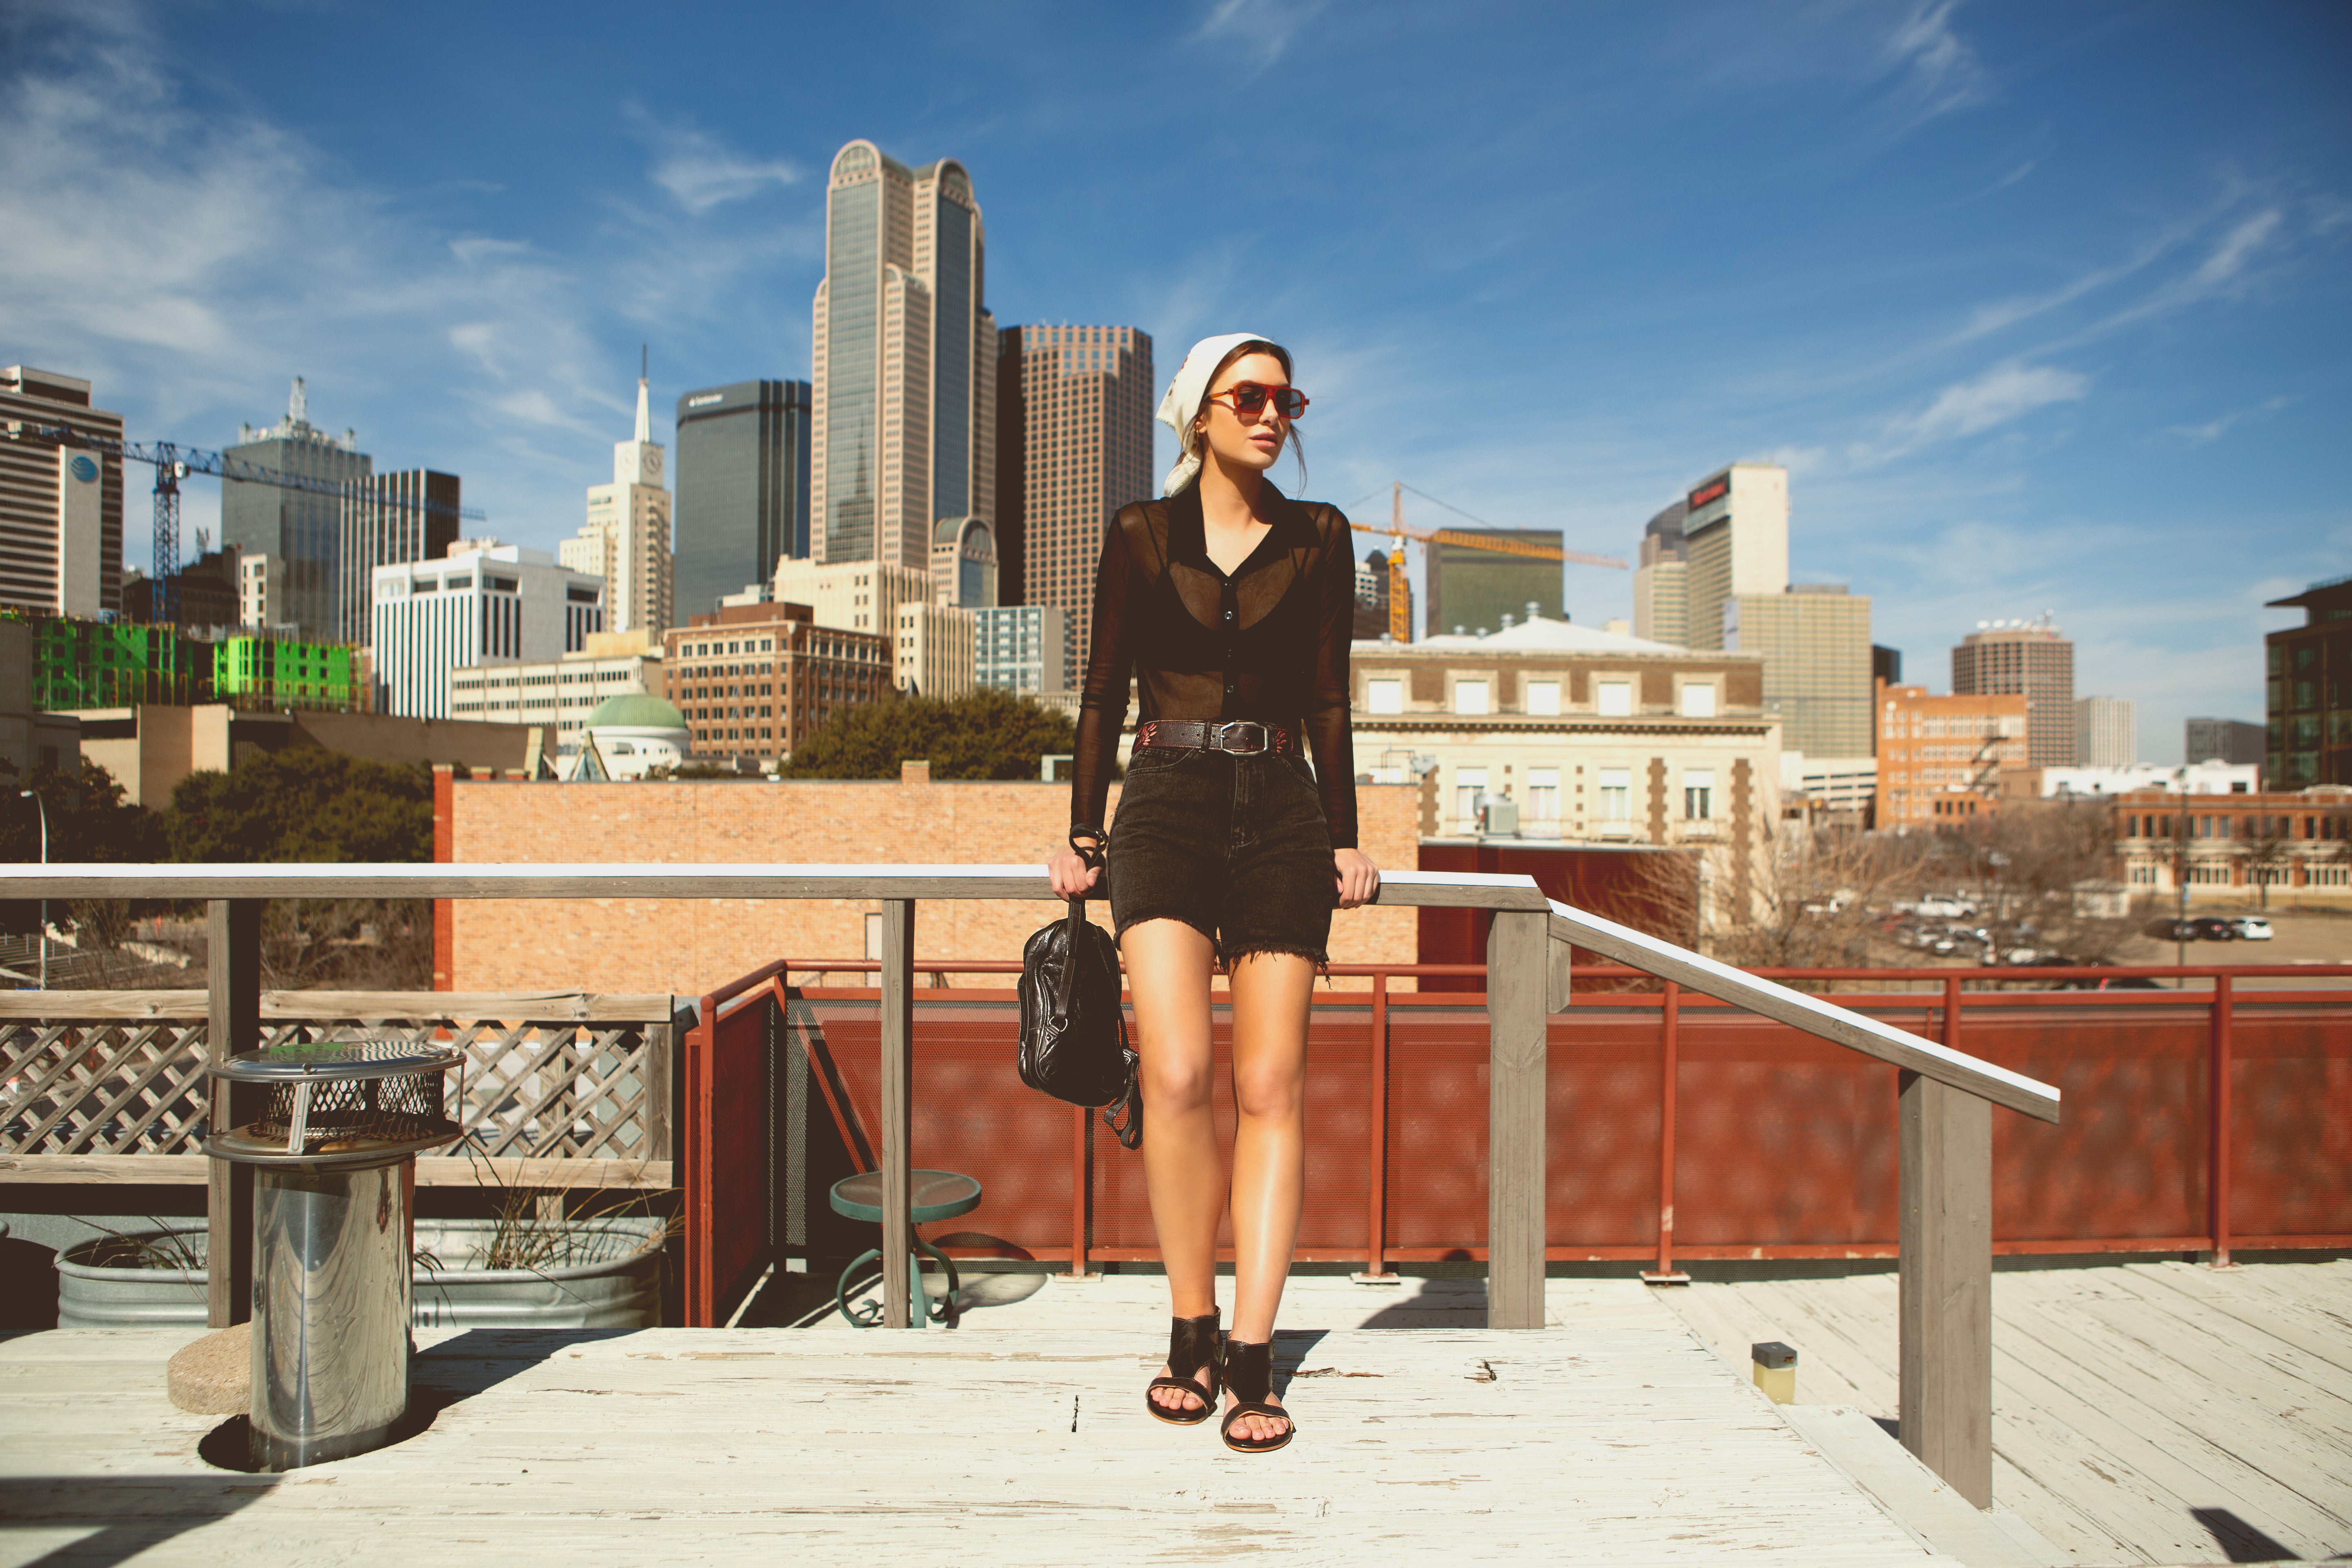 A woman in casual attire stands on a rooftop with a city skyline in the background on a clear day. Sporting trendy accessories, she wears sunglasses, a black top, and shorts while holding a black bag. Complete Your Look with Our 'Shop the Look' Bundle! by Bed|Stü for this effortlessly chic ensemble.